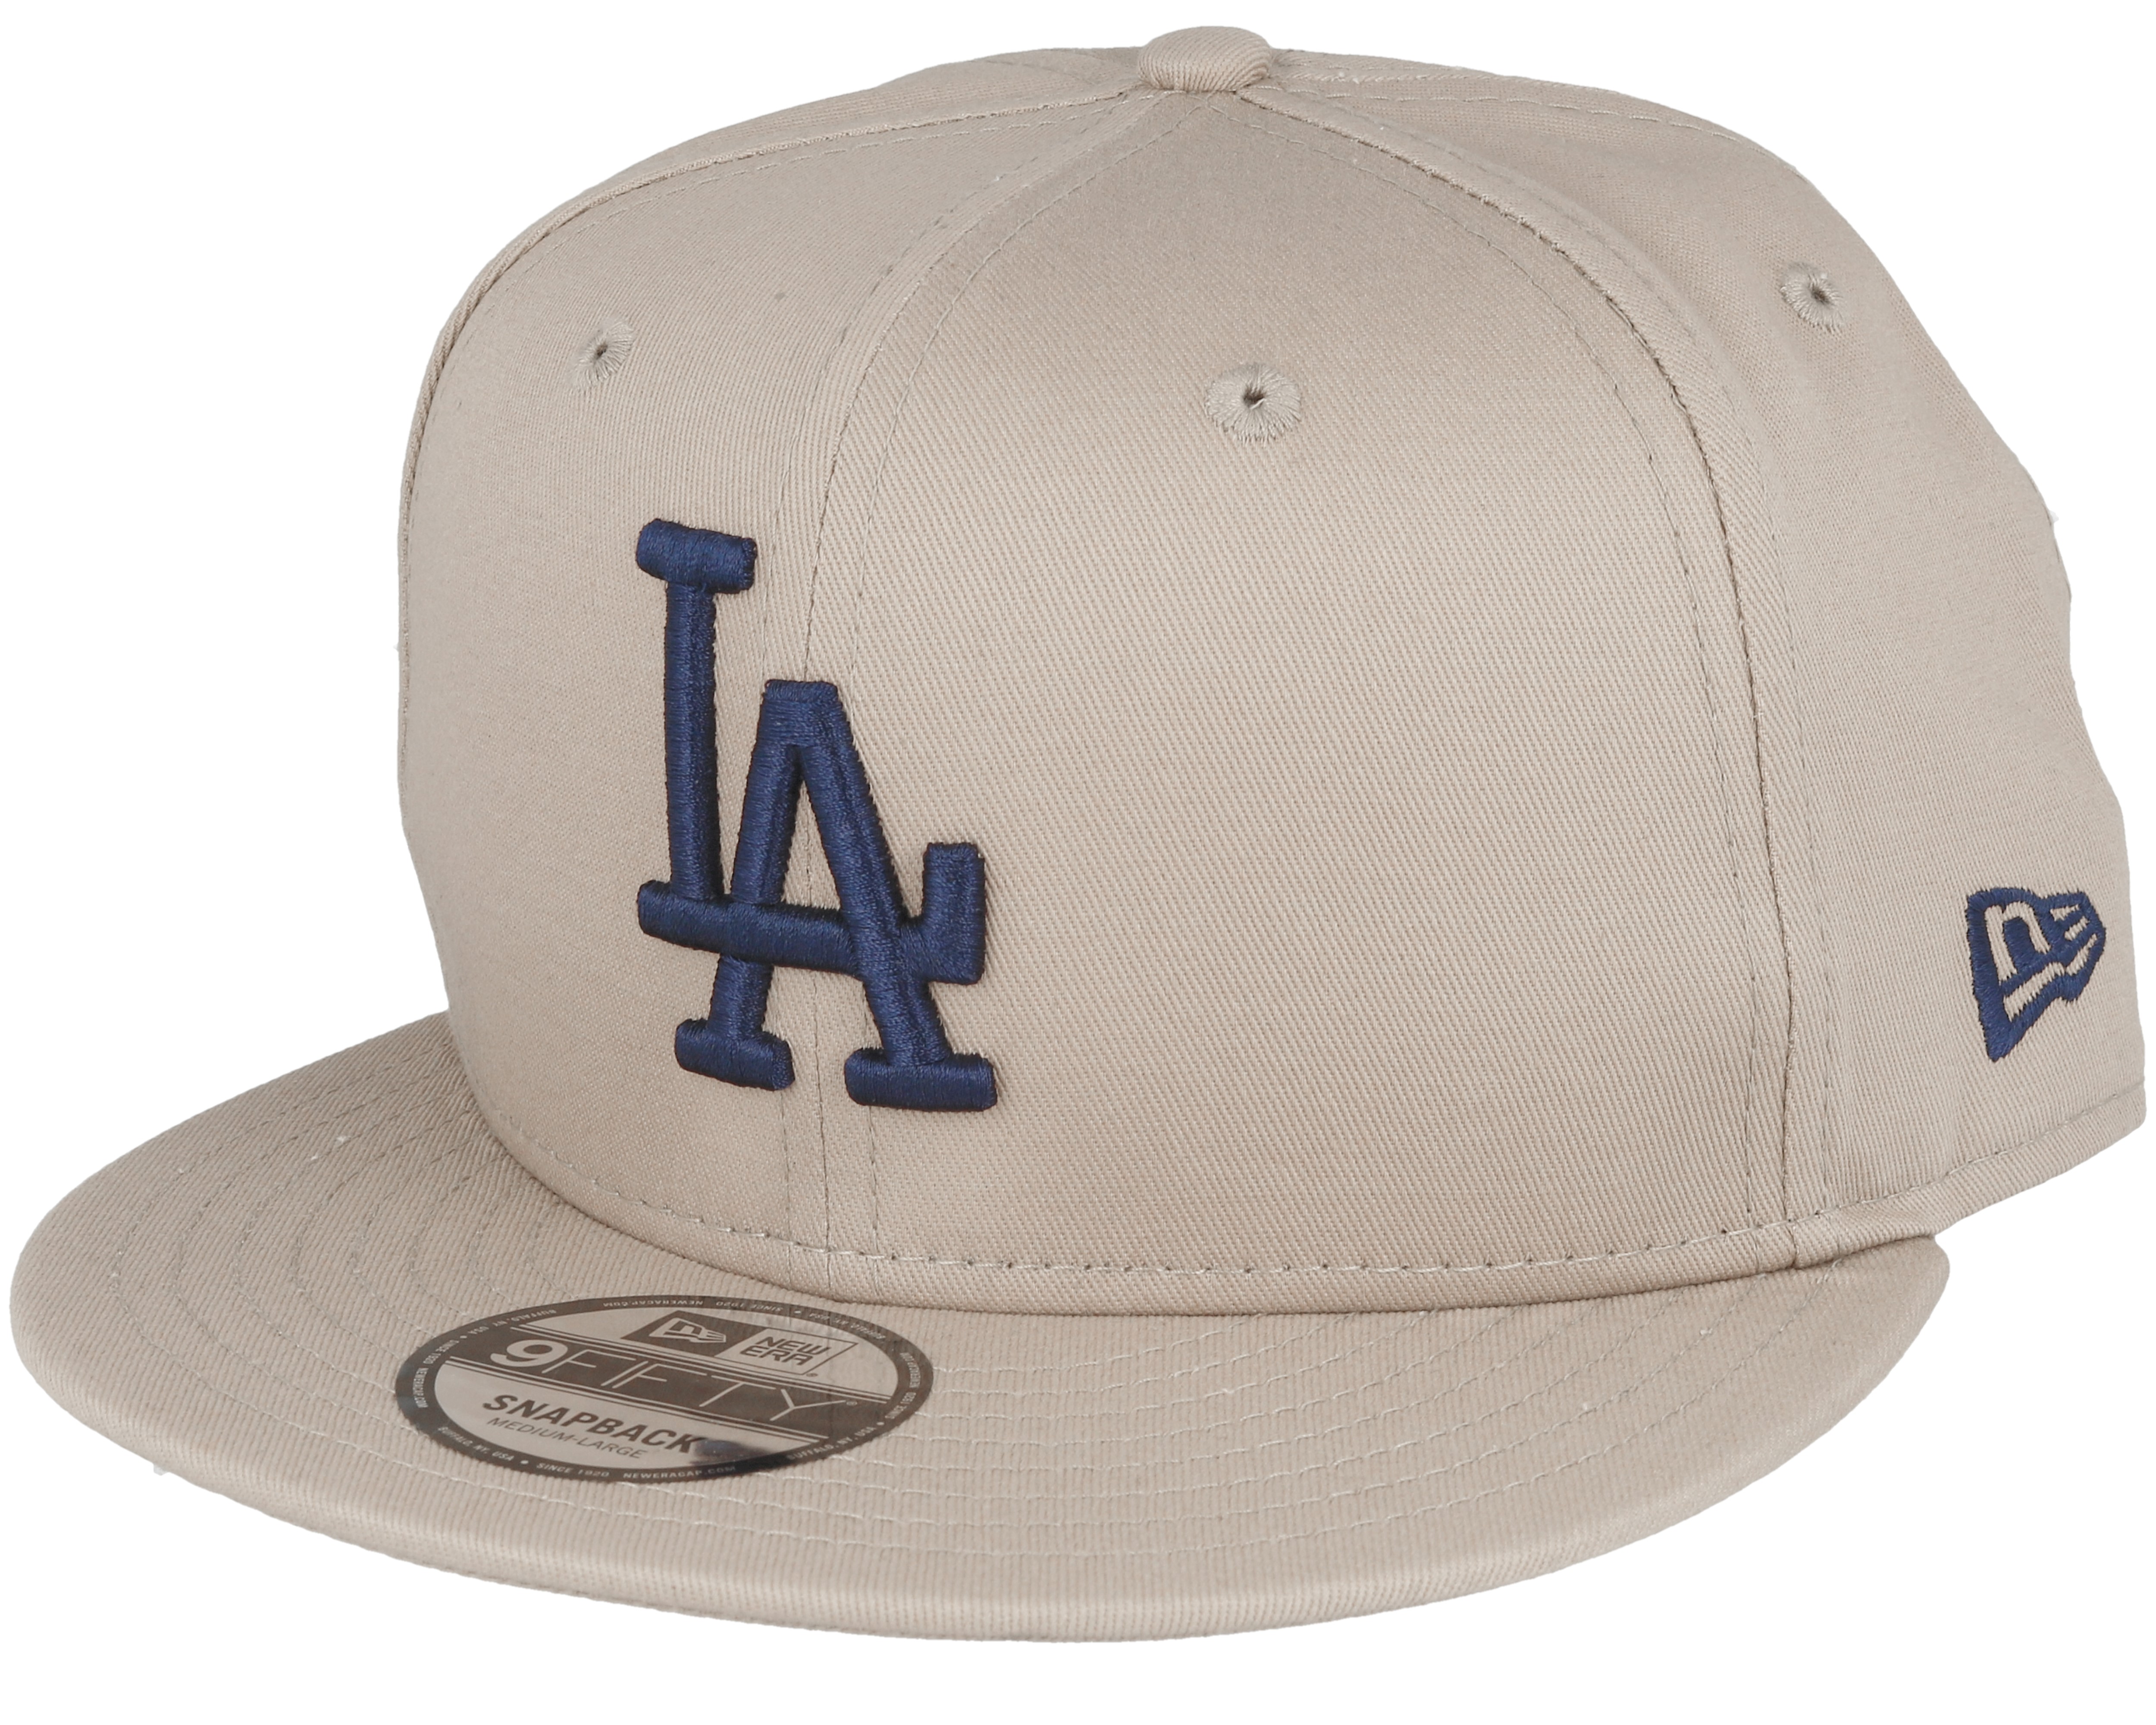 Los Angeles Dodgers League Essential 9Fifty Beige Snapback - New